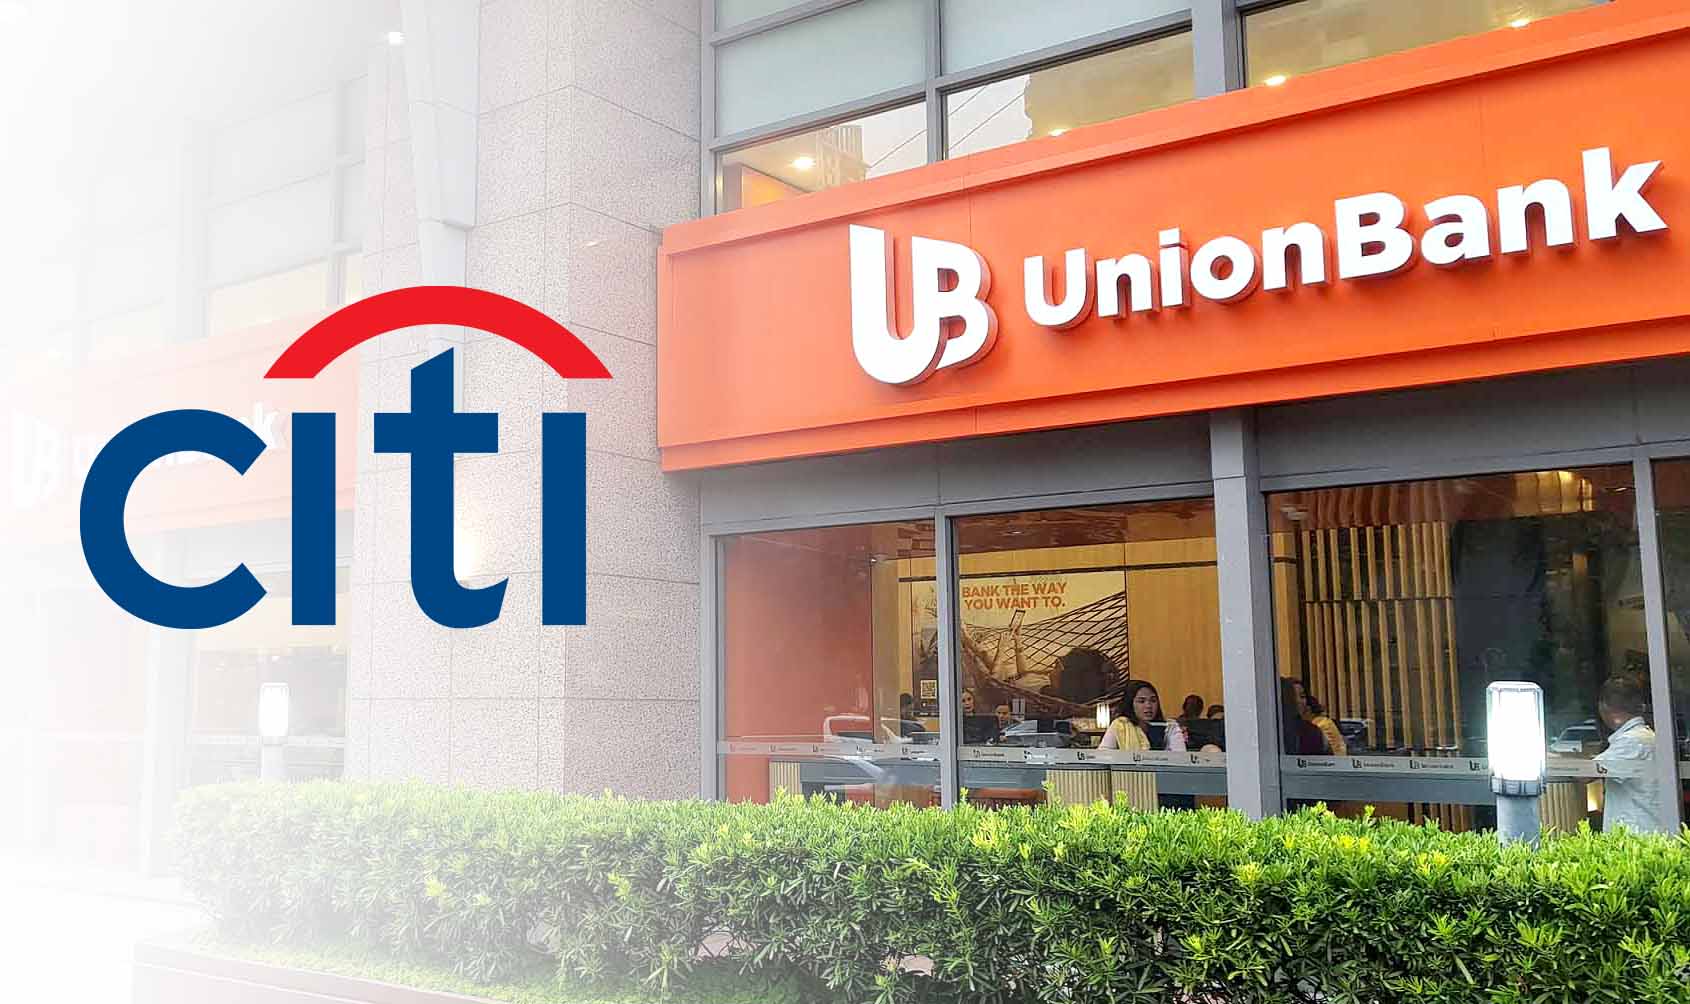 UnionBank acquires Citigroup’s consumer banking business in the Philippines